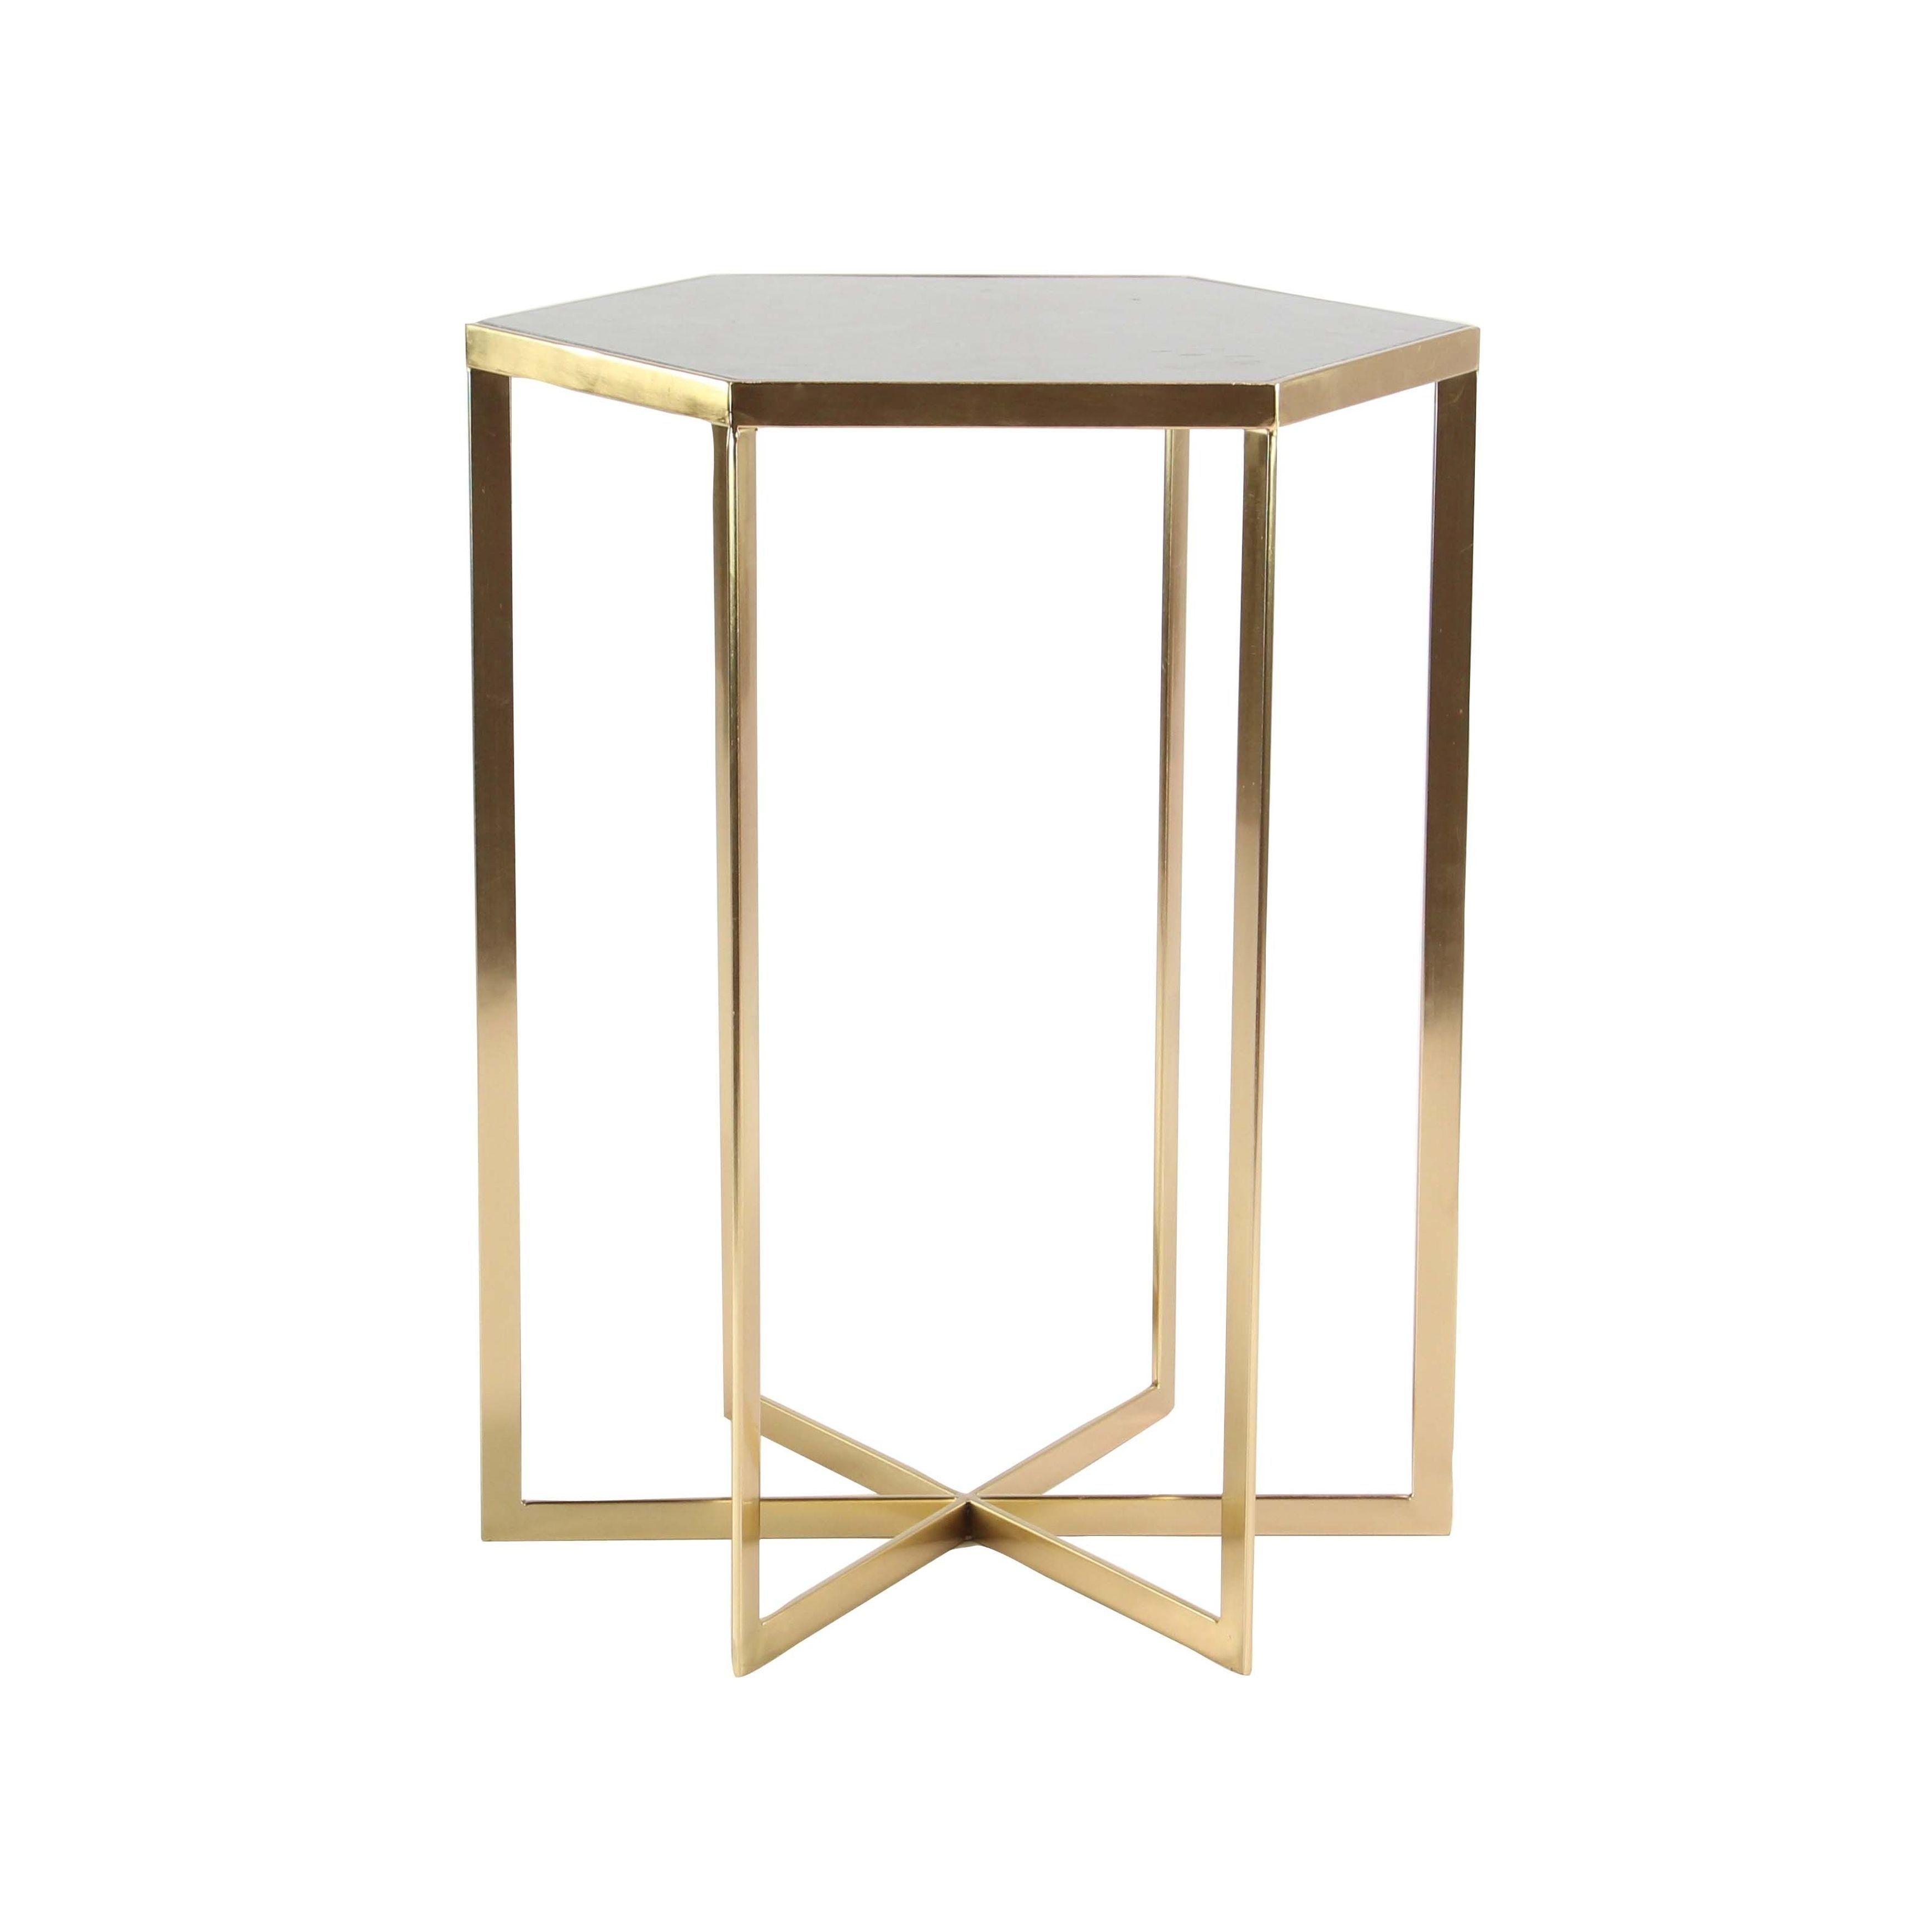 exciting marble end table gold target medal pool golden design legs standing and white convenience faux concepts concacaf rose dining runner base cup grazing hire coast coaster